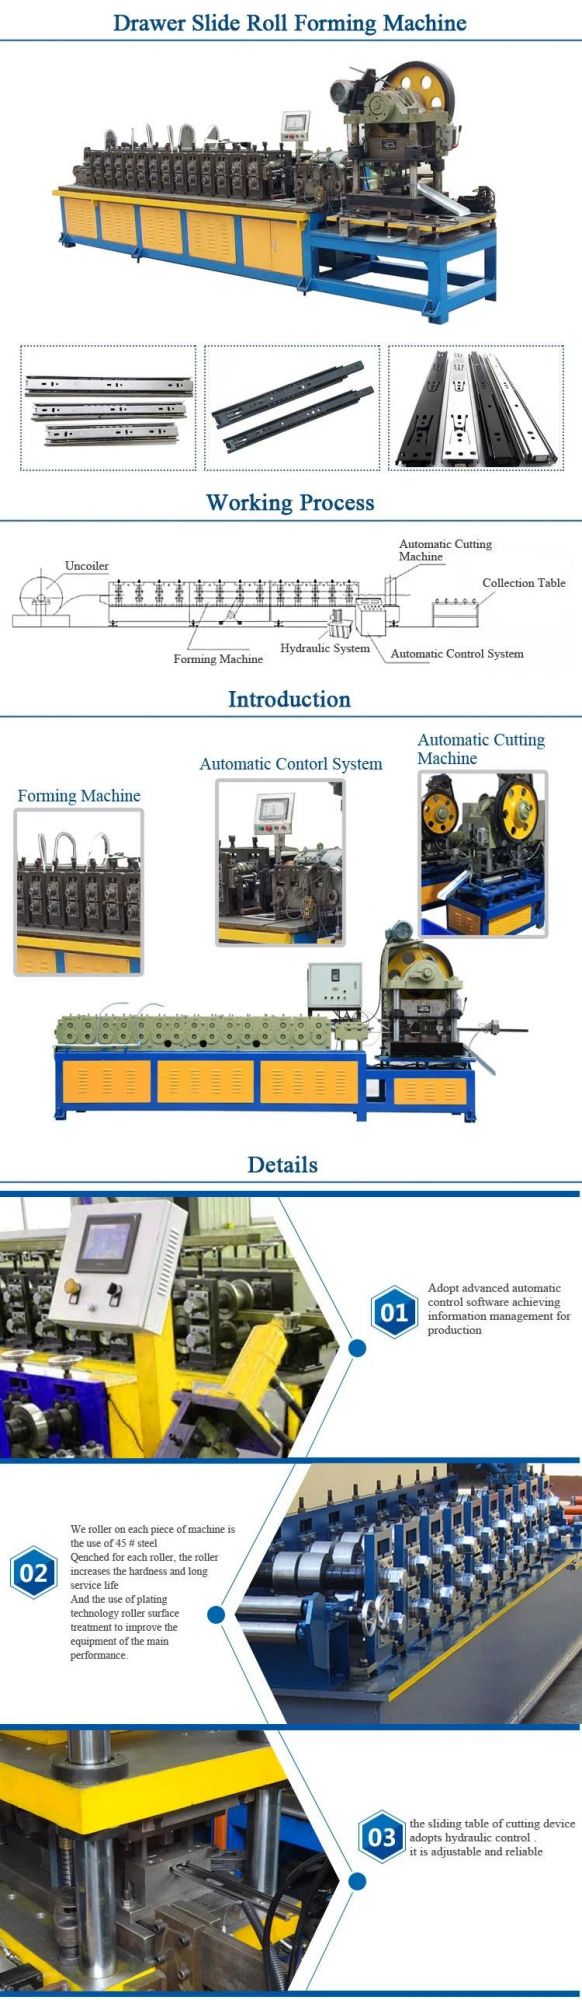 Steel Frame & Purlin Machine Type Drawer Slide Cold Roll Foming Machine for Sale